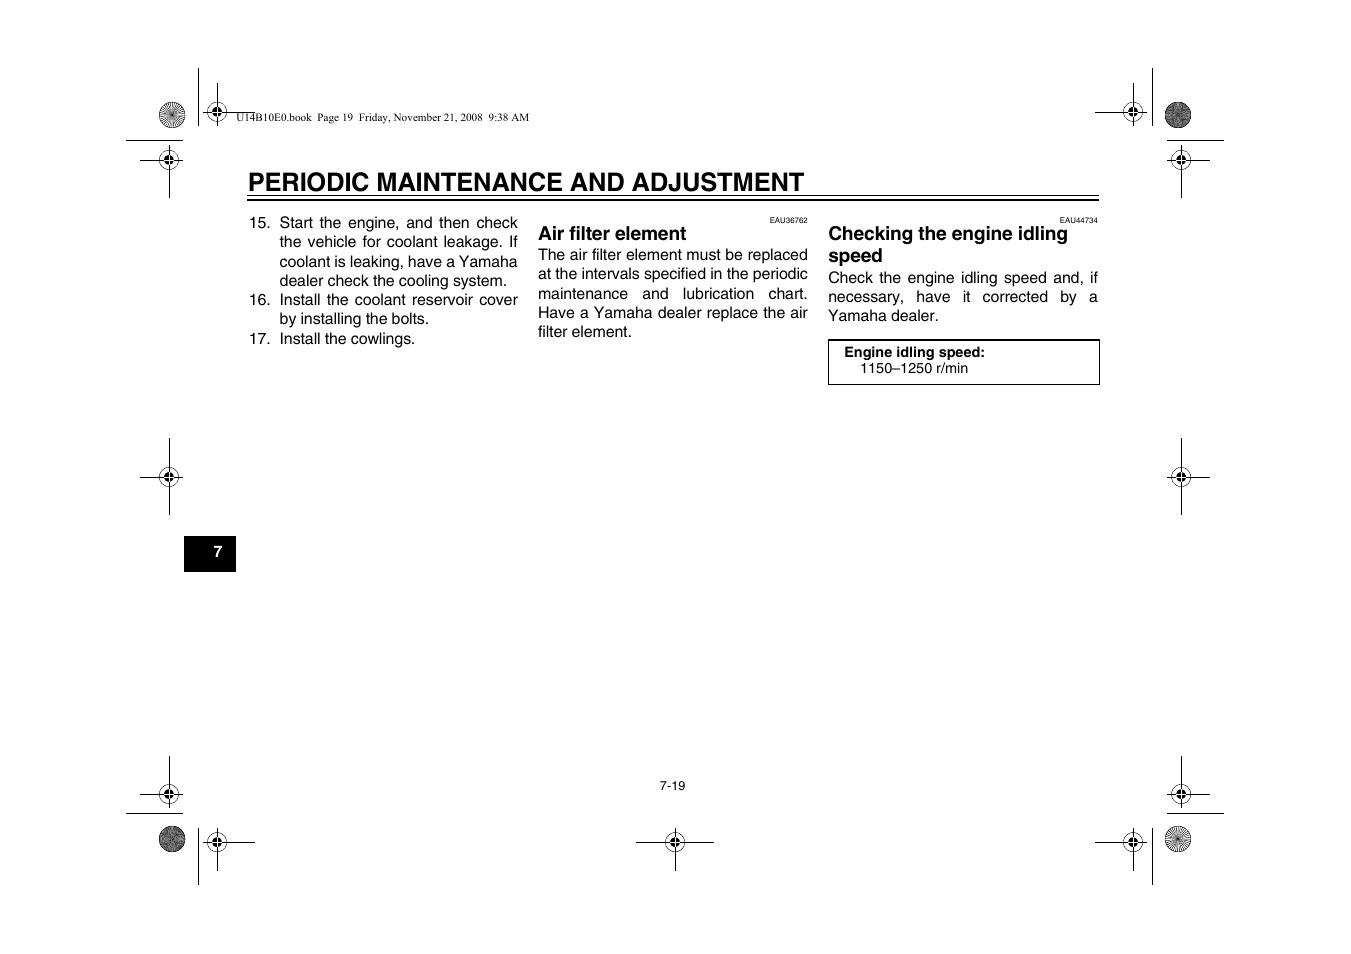 Air filter element -19, Checking the engine idling, Speed -19 | Periodic maintenance and adjustment | Yamaha YZFR1Y(C) User Manual | Page 74 / 122